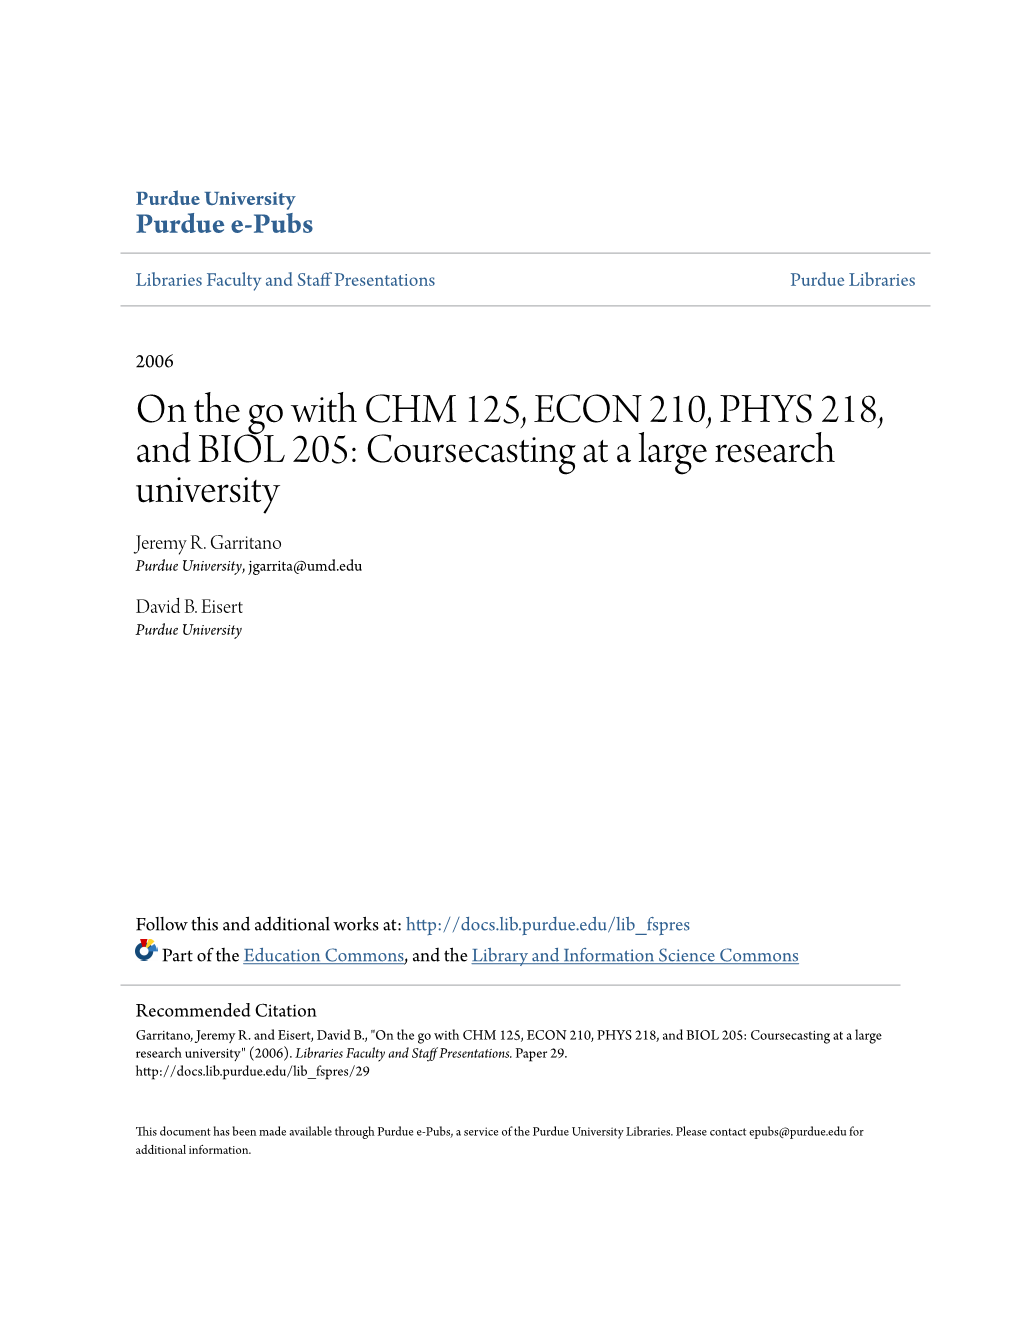 On the Go with CHM 125, ECON 210, PHYS 218, and BIOL 205: Coursecasting at a Large Research University Jeremy R